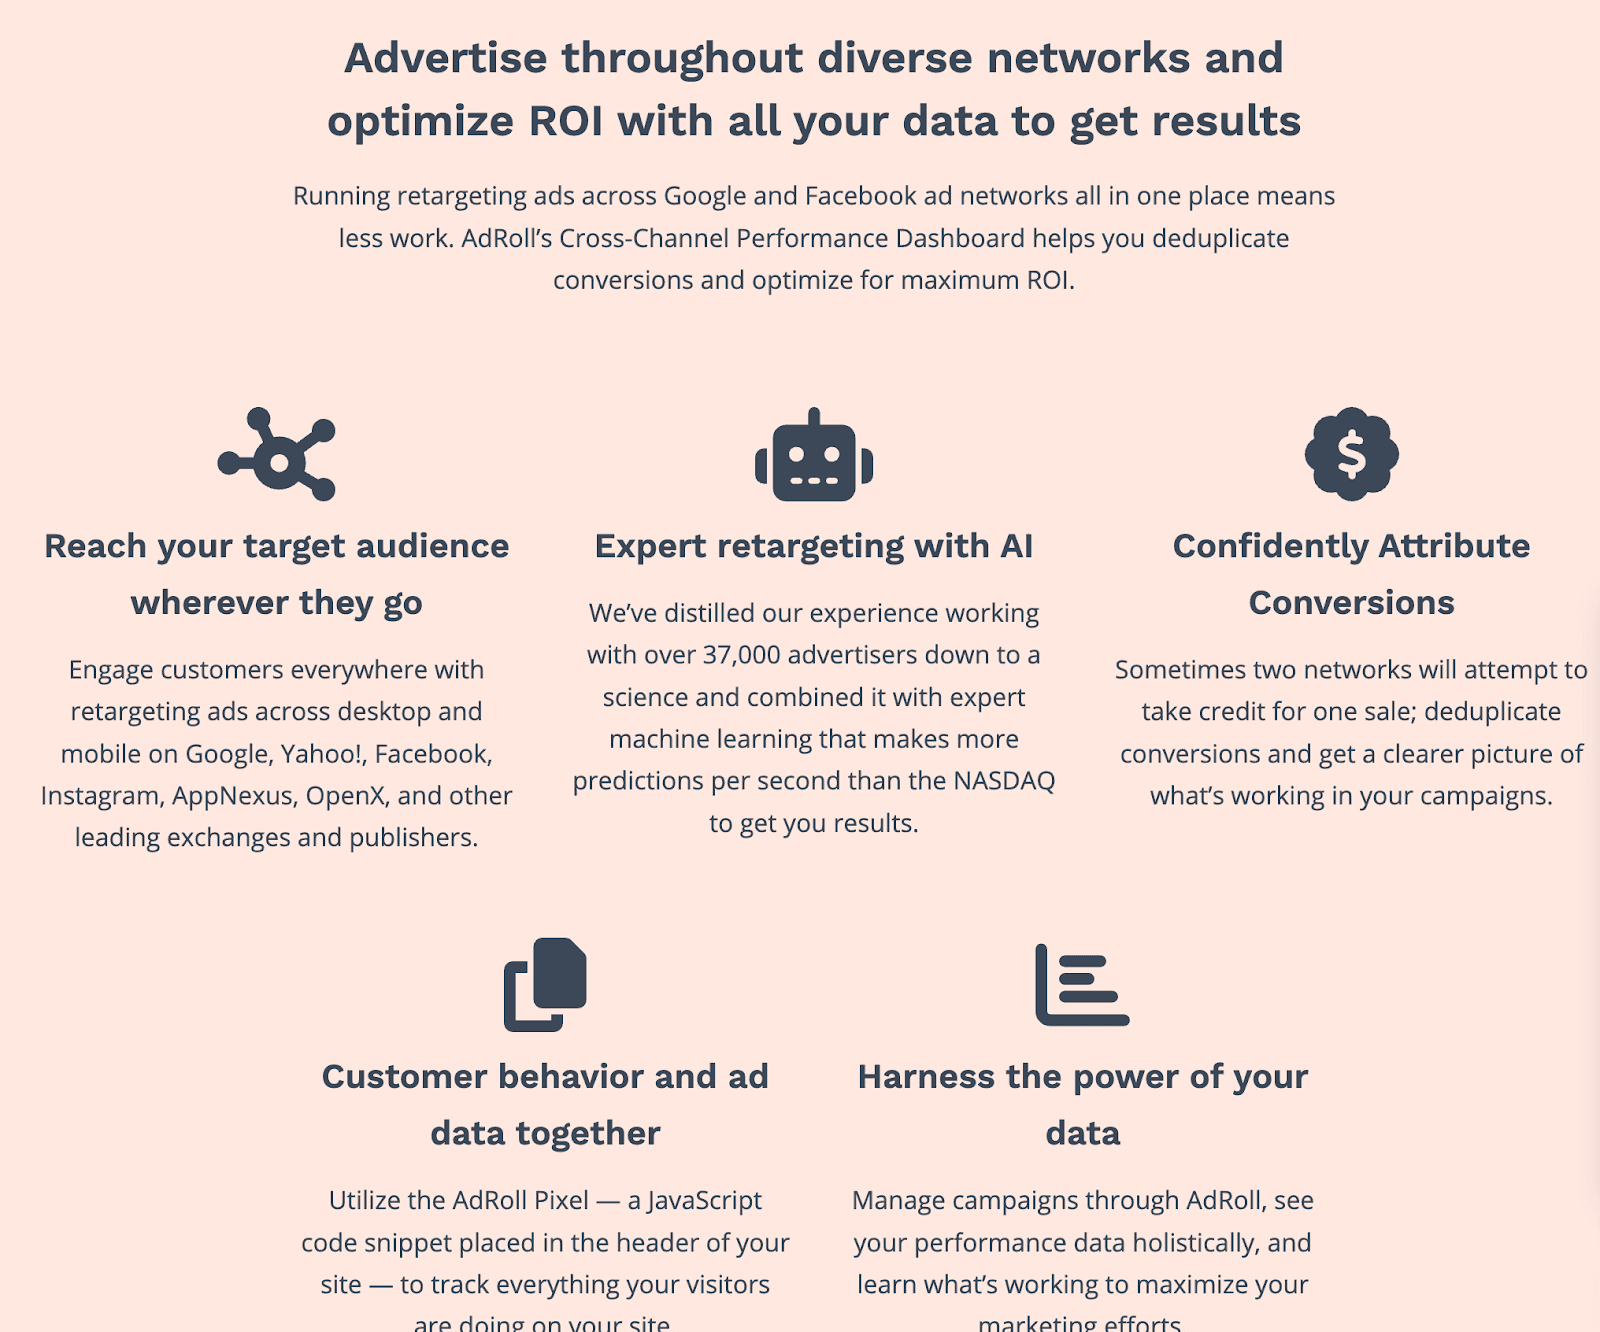 Advertise throughout diverse networks and optimize ROI with all your data to get results